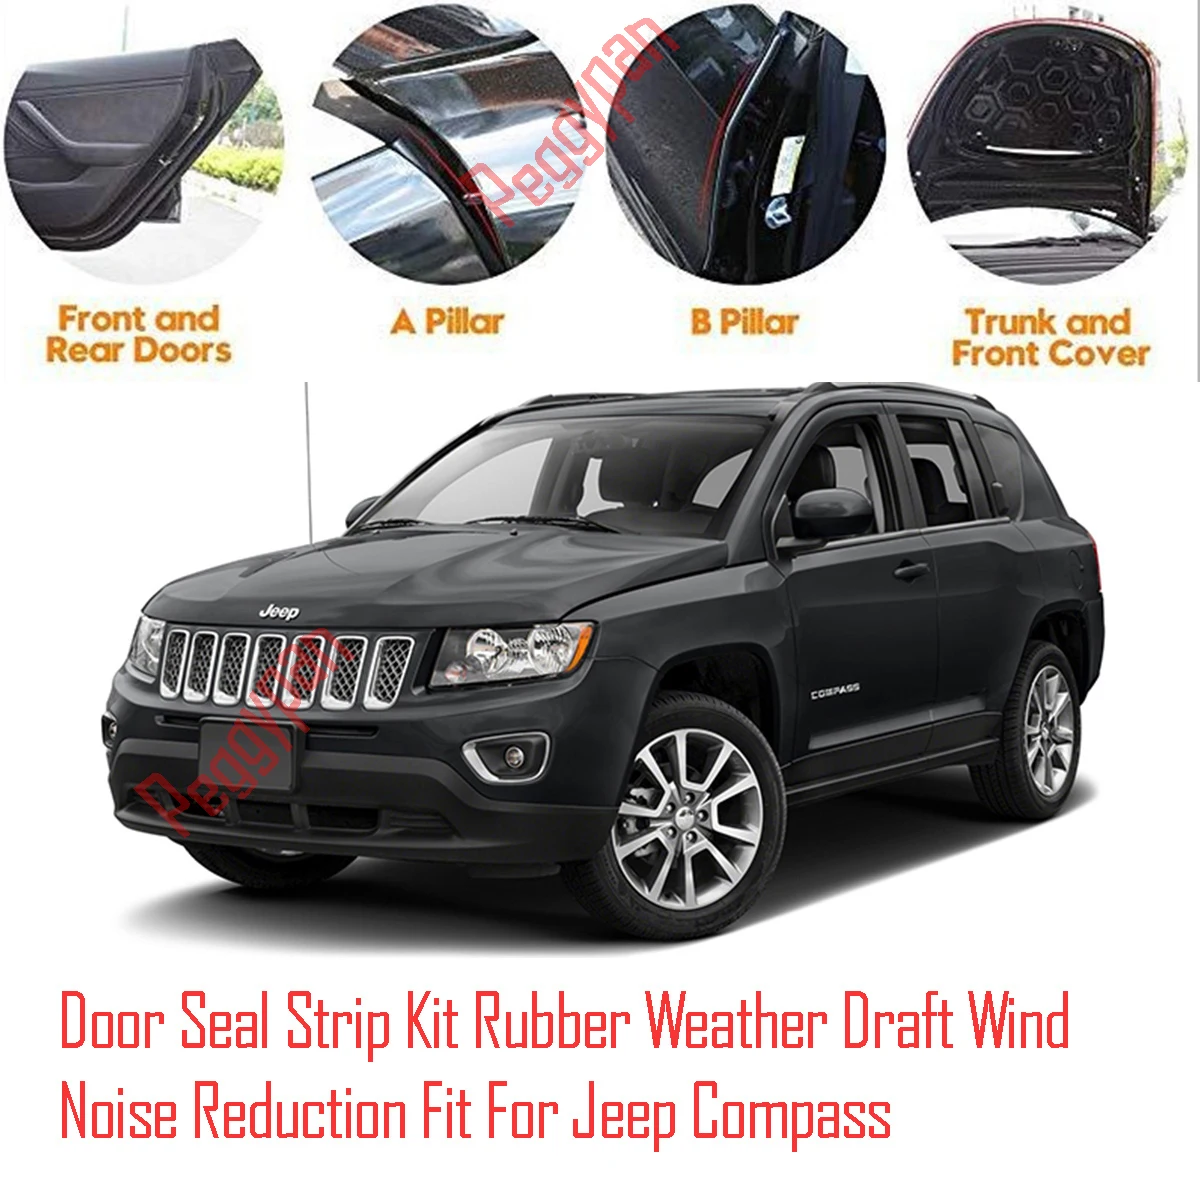 Door Seal Strip Kit Self Adhesive Window Engine Cover Soundproof Rubber Weather Draft Wind Noise Reduction Fit For Jeep Compass